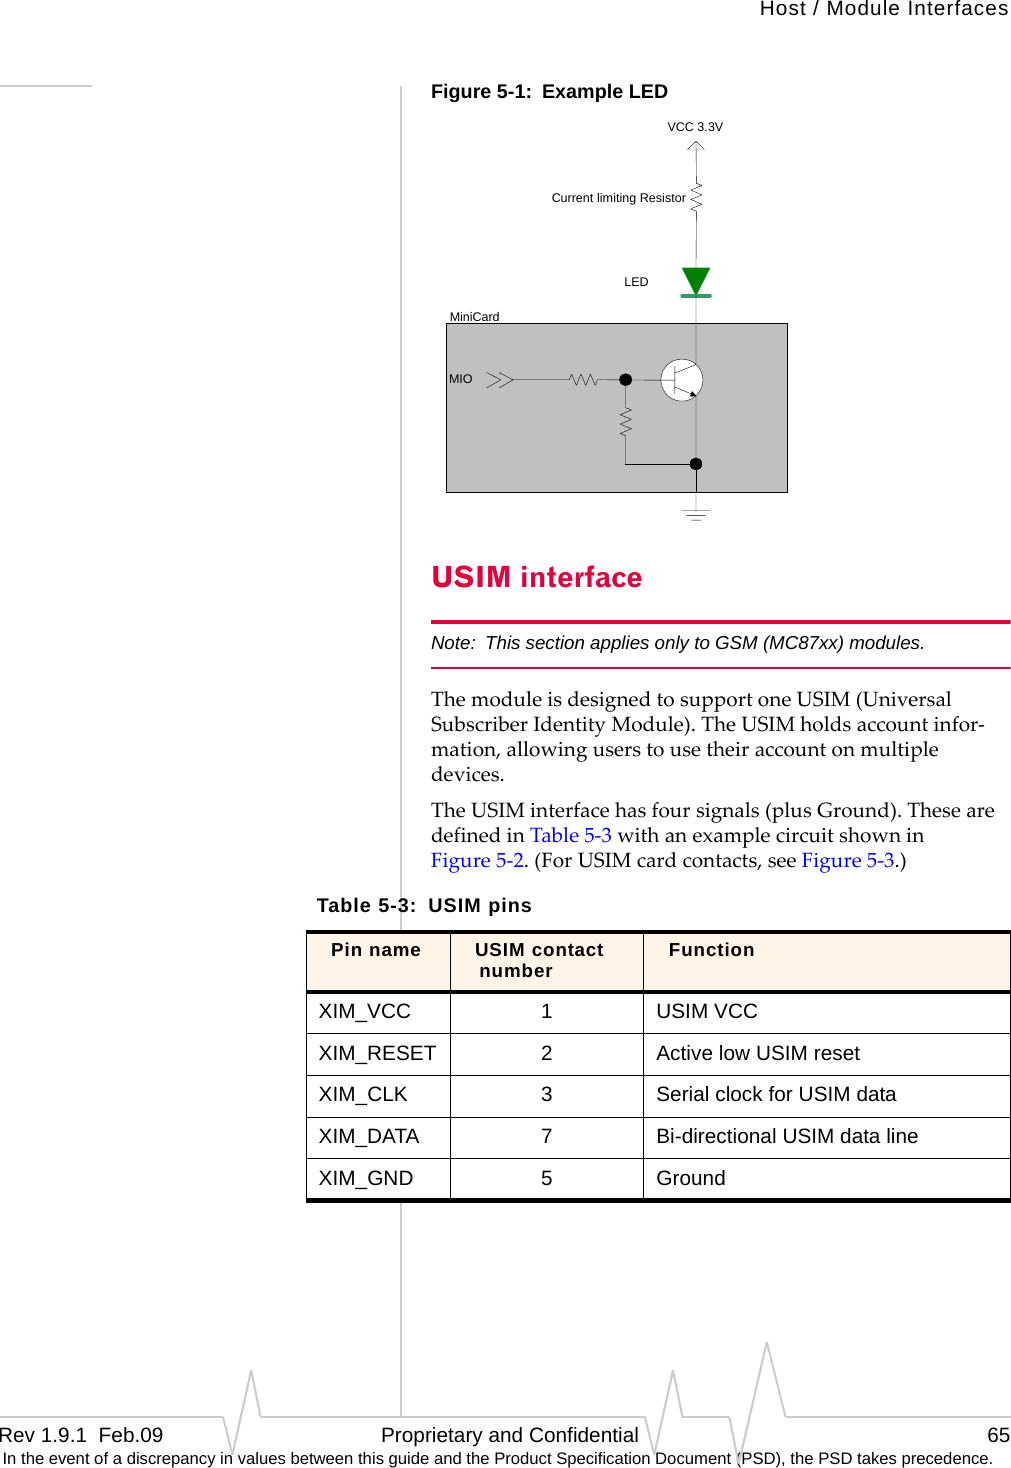 Host / Module InterfacesRev 1.9.1  Feb.09   Proprietary and Confidential 65 In the event of a discrepancy in values between this guide and the Product Specification Document (PSD), the PSD takes precedence.Figure 5-1:  Example LEDUSIM interfaceNote: This section applies only to GSM (MC87xx) modules.ThemoduleisdesignedtosupportoneUSIM(UniversalSubscriberIdentityModule).TheUSIMholdsaccountinfor‐mation,allowinguserstousetheiraccountonmultipledevices.TheUSIMinterfacehasfoursignals(plusGround).ThesearedefinedinTable5‐3withanexamplecircuitshowninFigure5‐2.(ForUSIMcardcontacts,seeFigure5‐3.)Current limiting ResistorLEDVCC 3.3VMIOMiniCardTable 5-3:  USIM pinsPin name USIM contact number FunctionXIM_VCC 1USIM VCCXIM_RESET 2Active low USIM resetXIM_CLK 3Serial clock for USIM dataXIM_DATA 7Bi-directional USIM data lineXIM_GND 5Ground